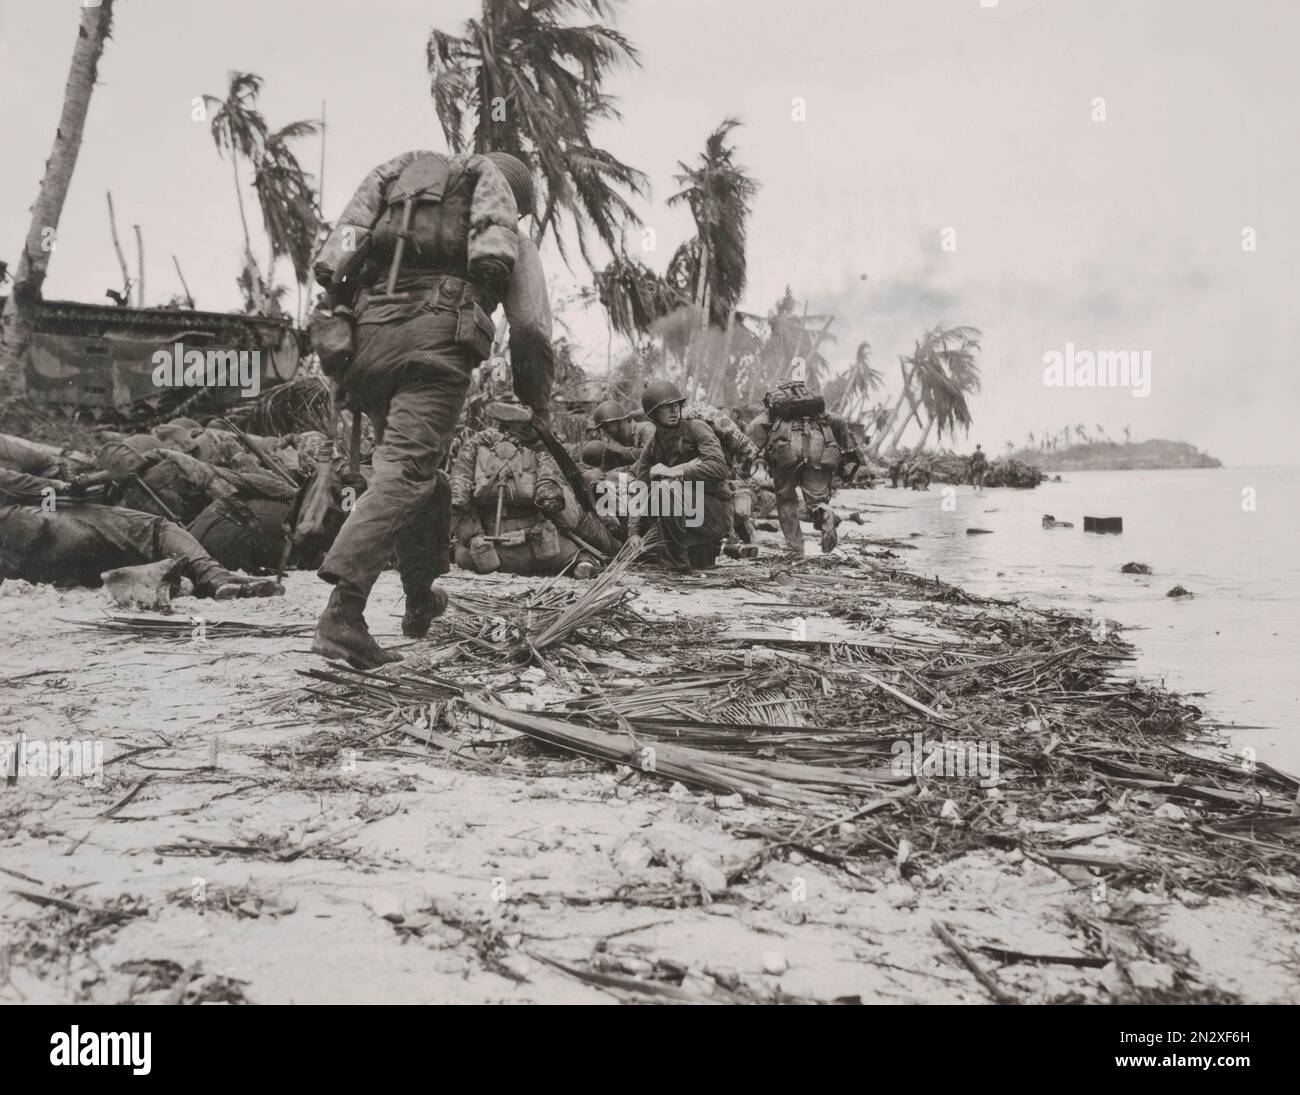 GUAM, MARIANA ISLANDS - 21 July 1944 - US Marines take cover while coming under fire from Japanese defenders during the Second Battle of Guam in the M Stock Photo